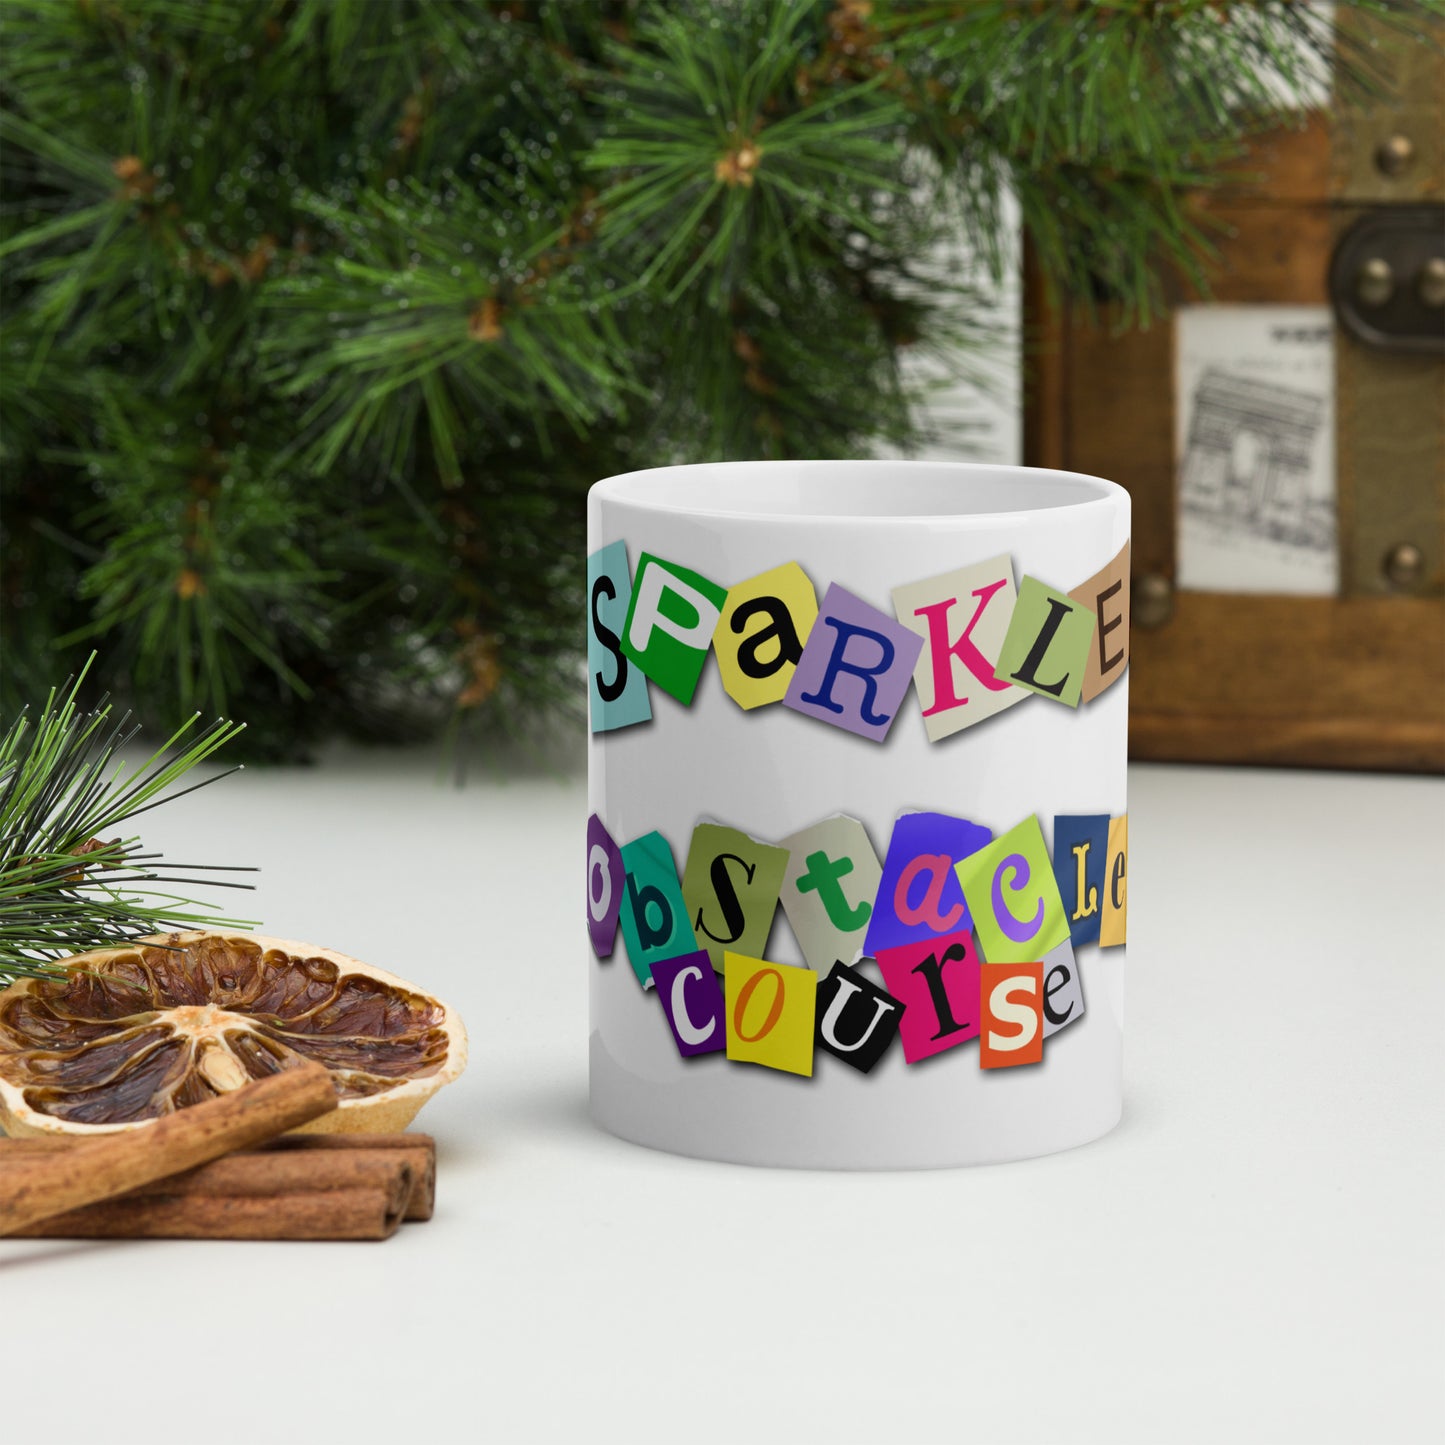 Sparkle's 'Obstacle Course' White Glossy Coffee Mug